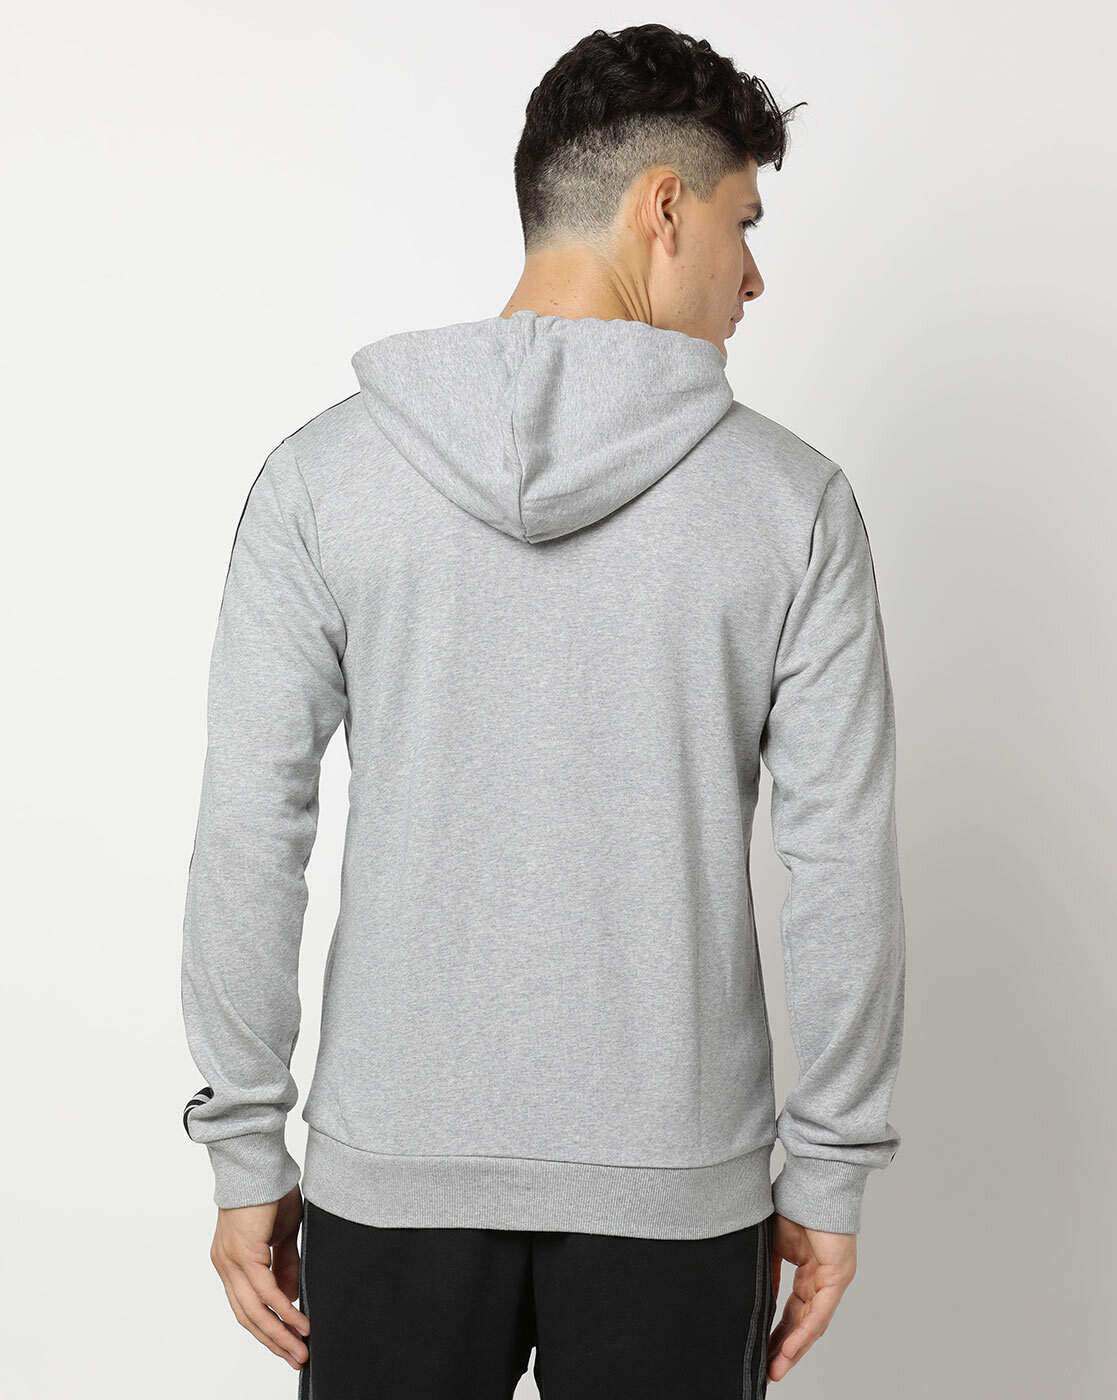 Buy Grey Jackets & Coats for Men by ADIDAS Online